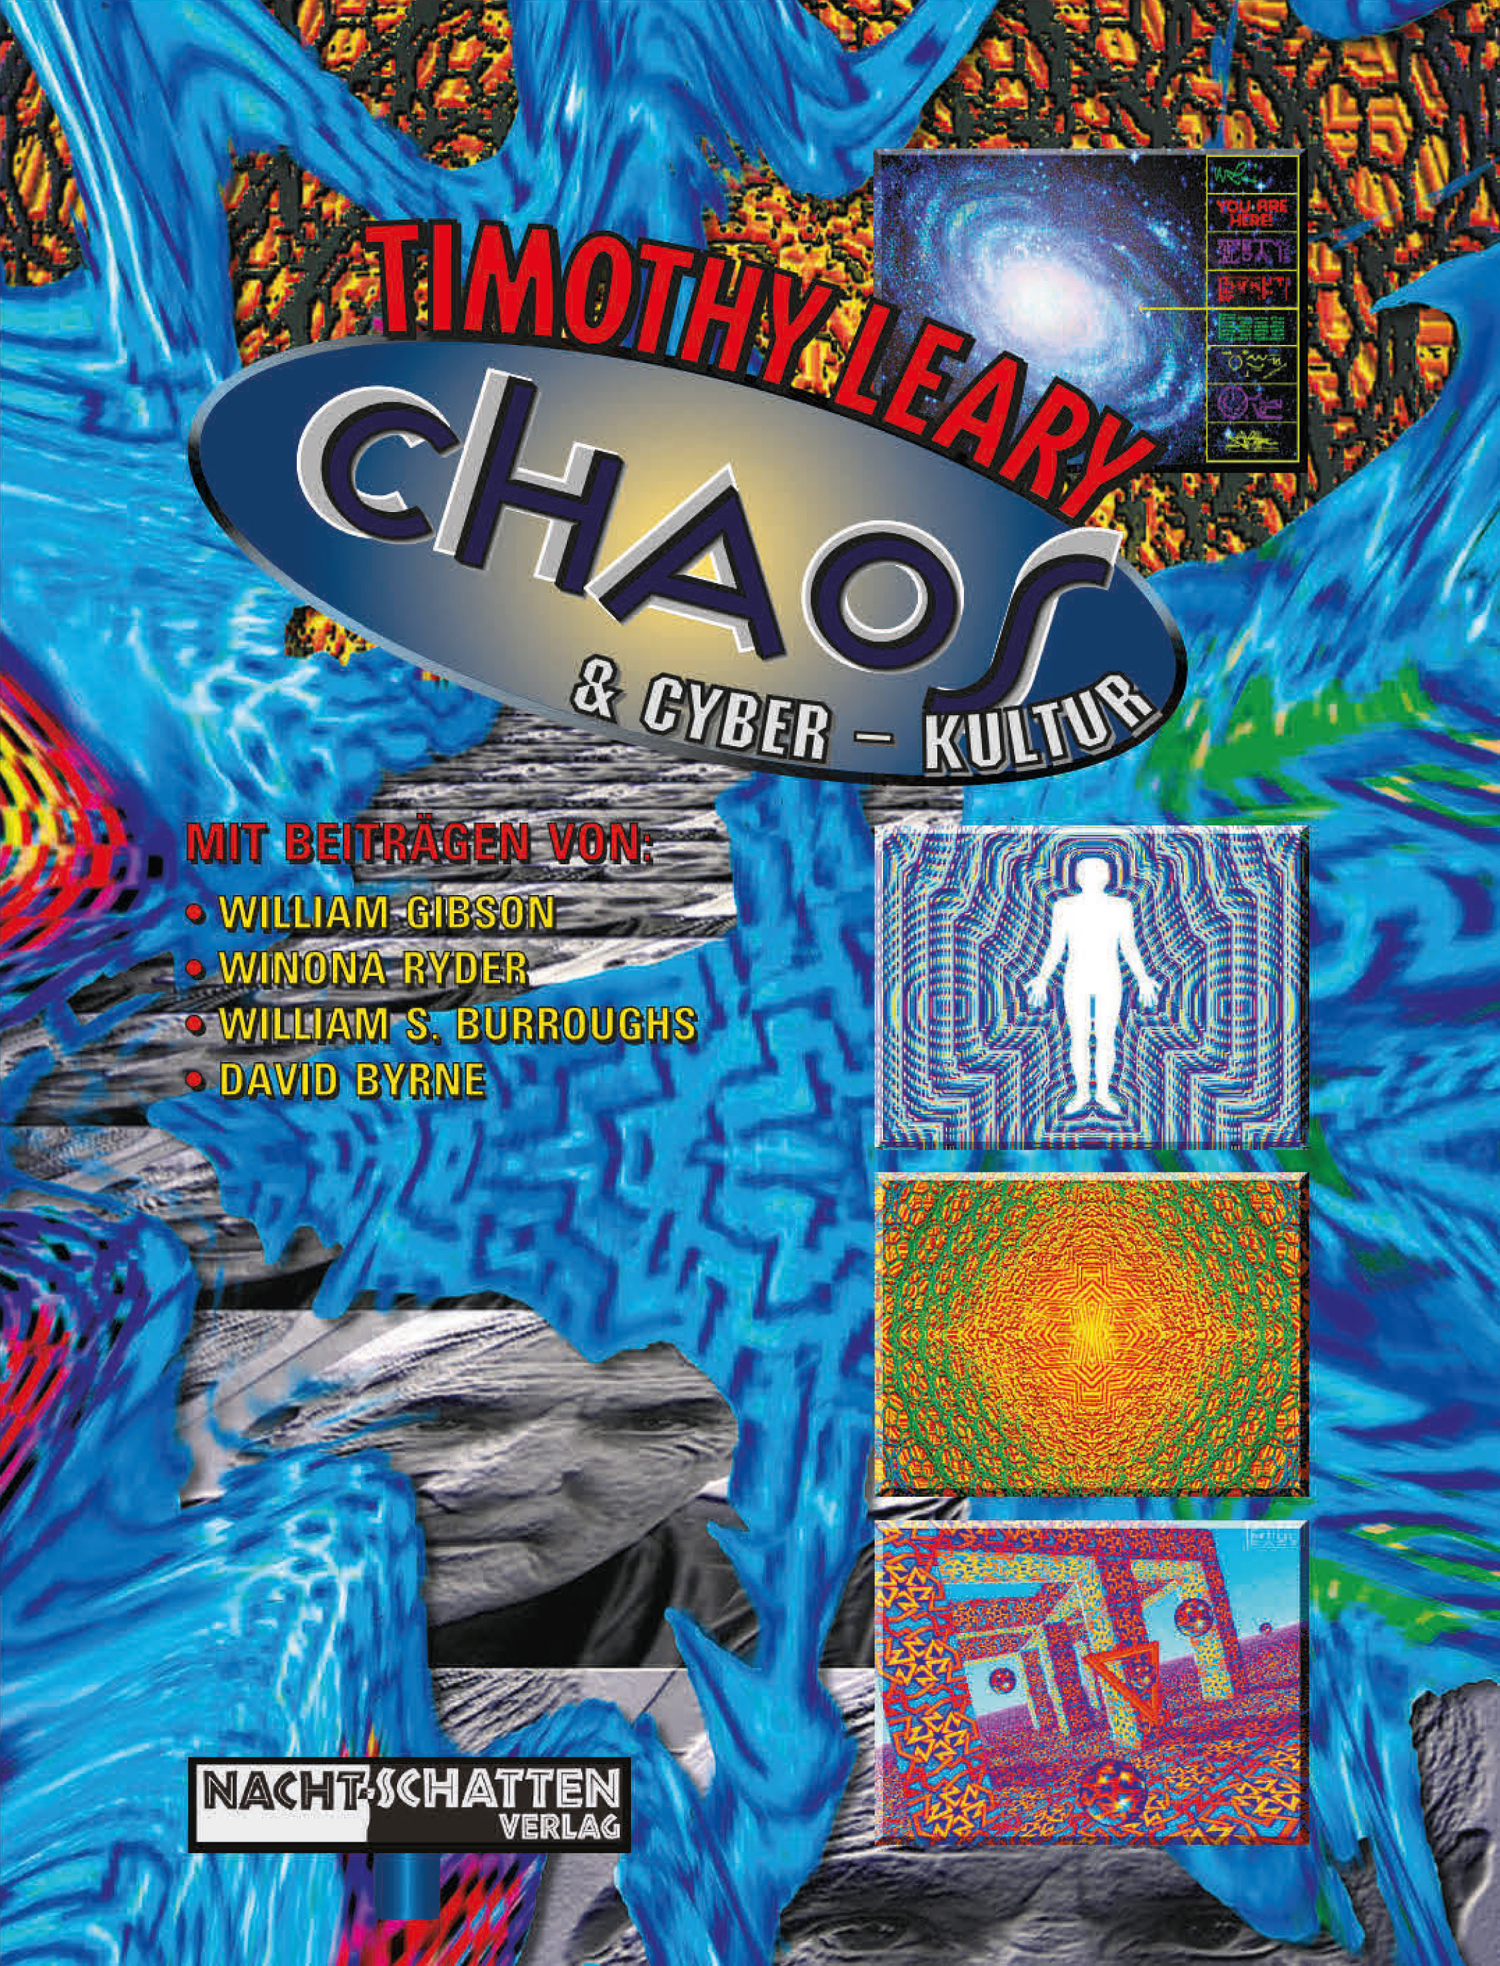 Buchtitel „Chaos & Cyber-Kultur“ von Timothy Leary